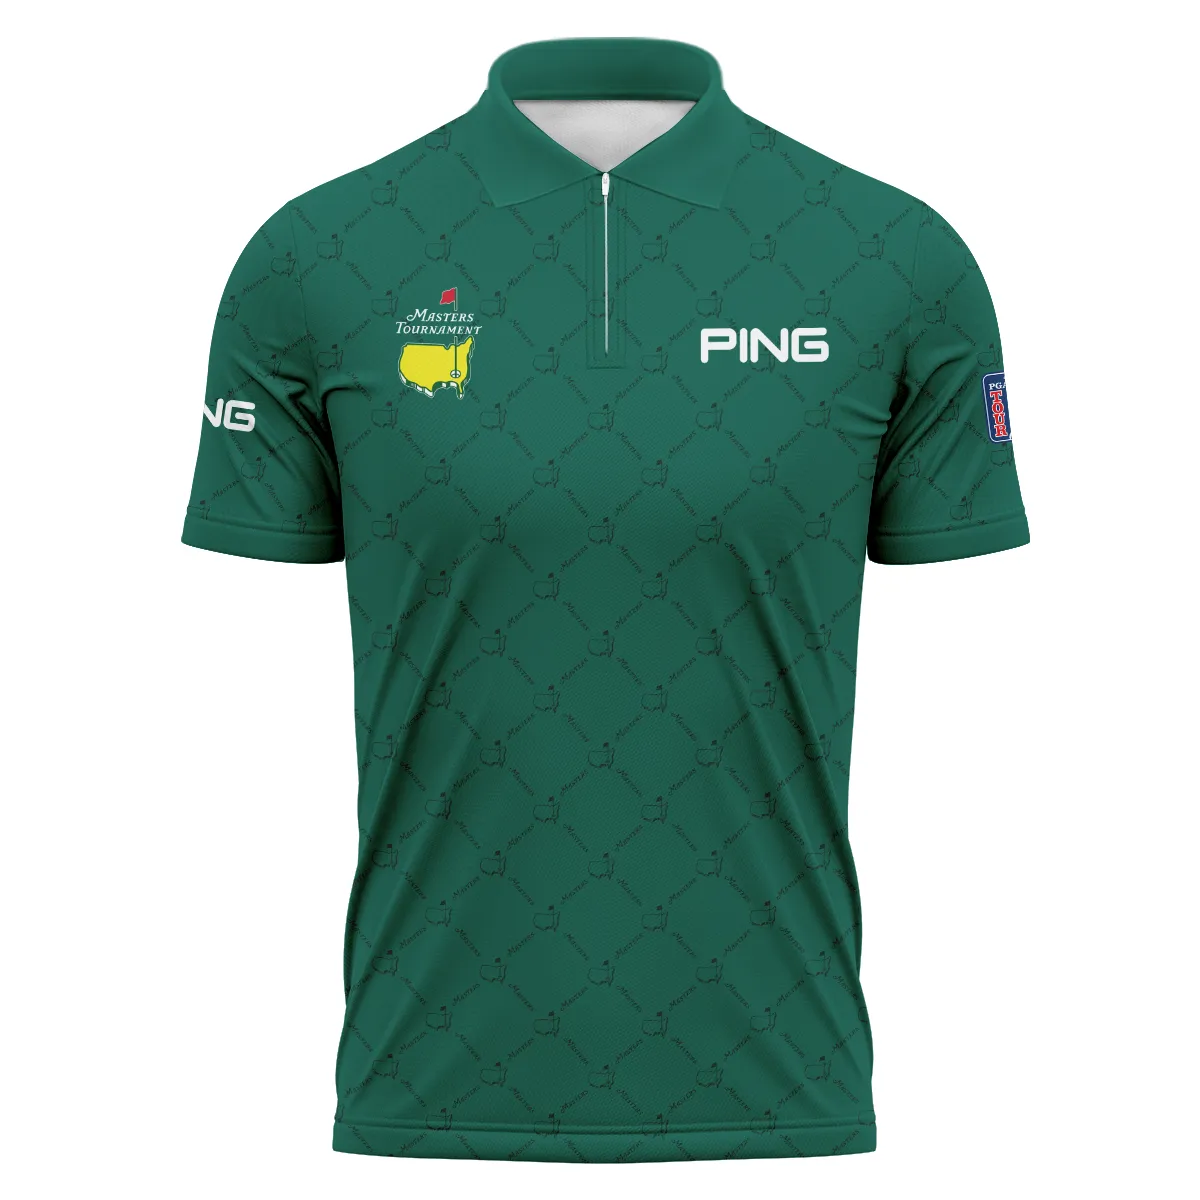 Golf Sport Pattern Color Green Mix Black Masters Tournament Ping Performance T-Shirt Style Classic